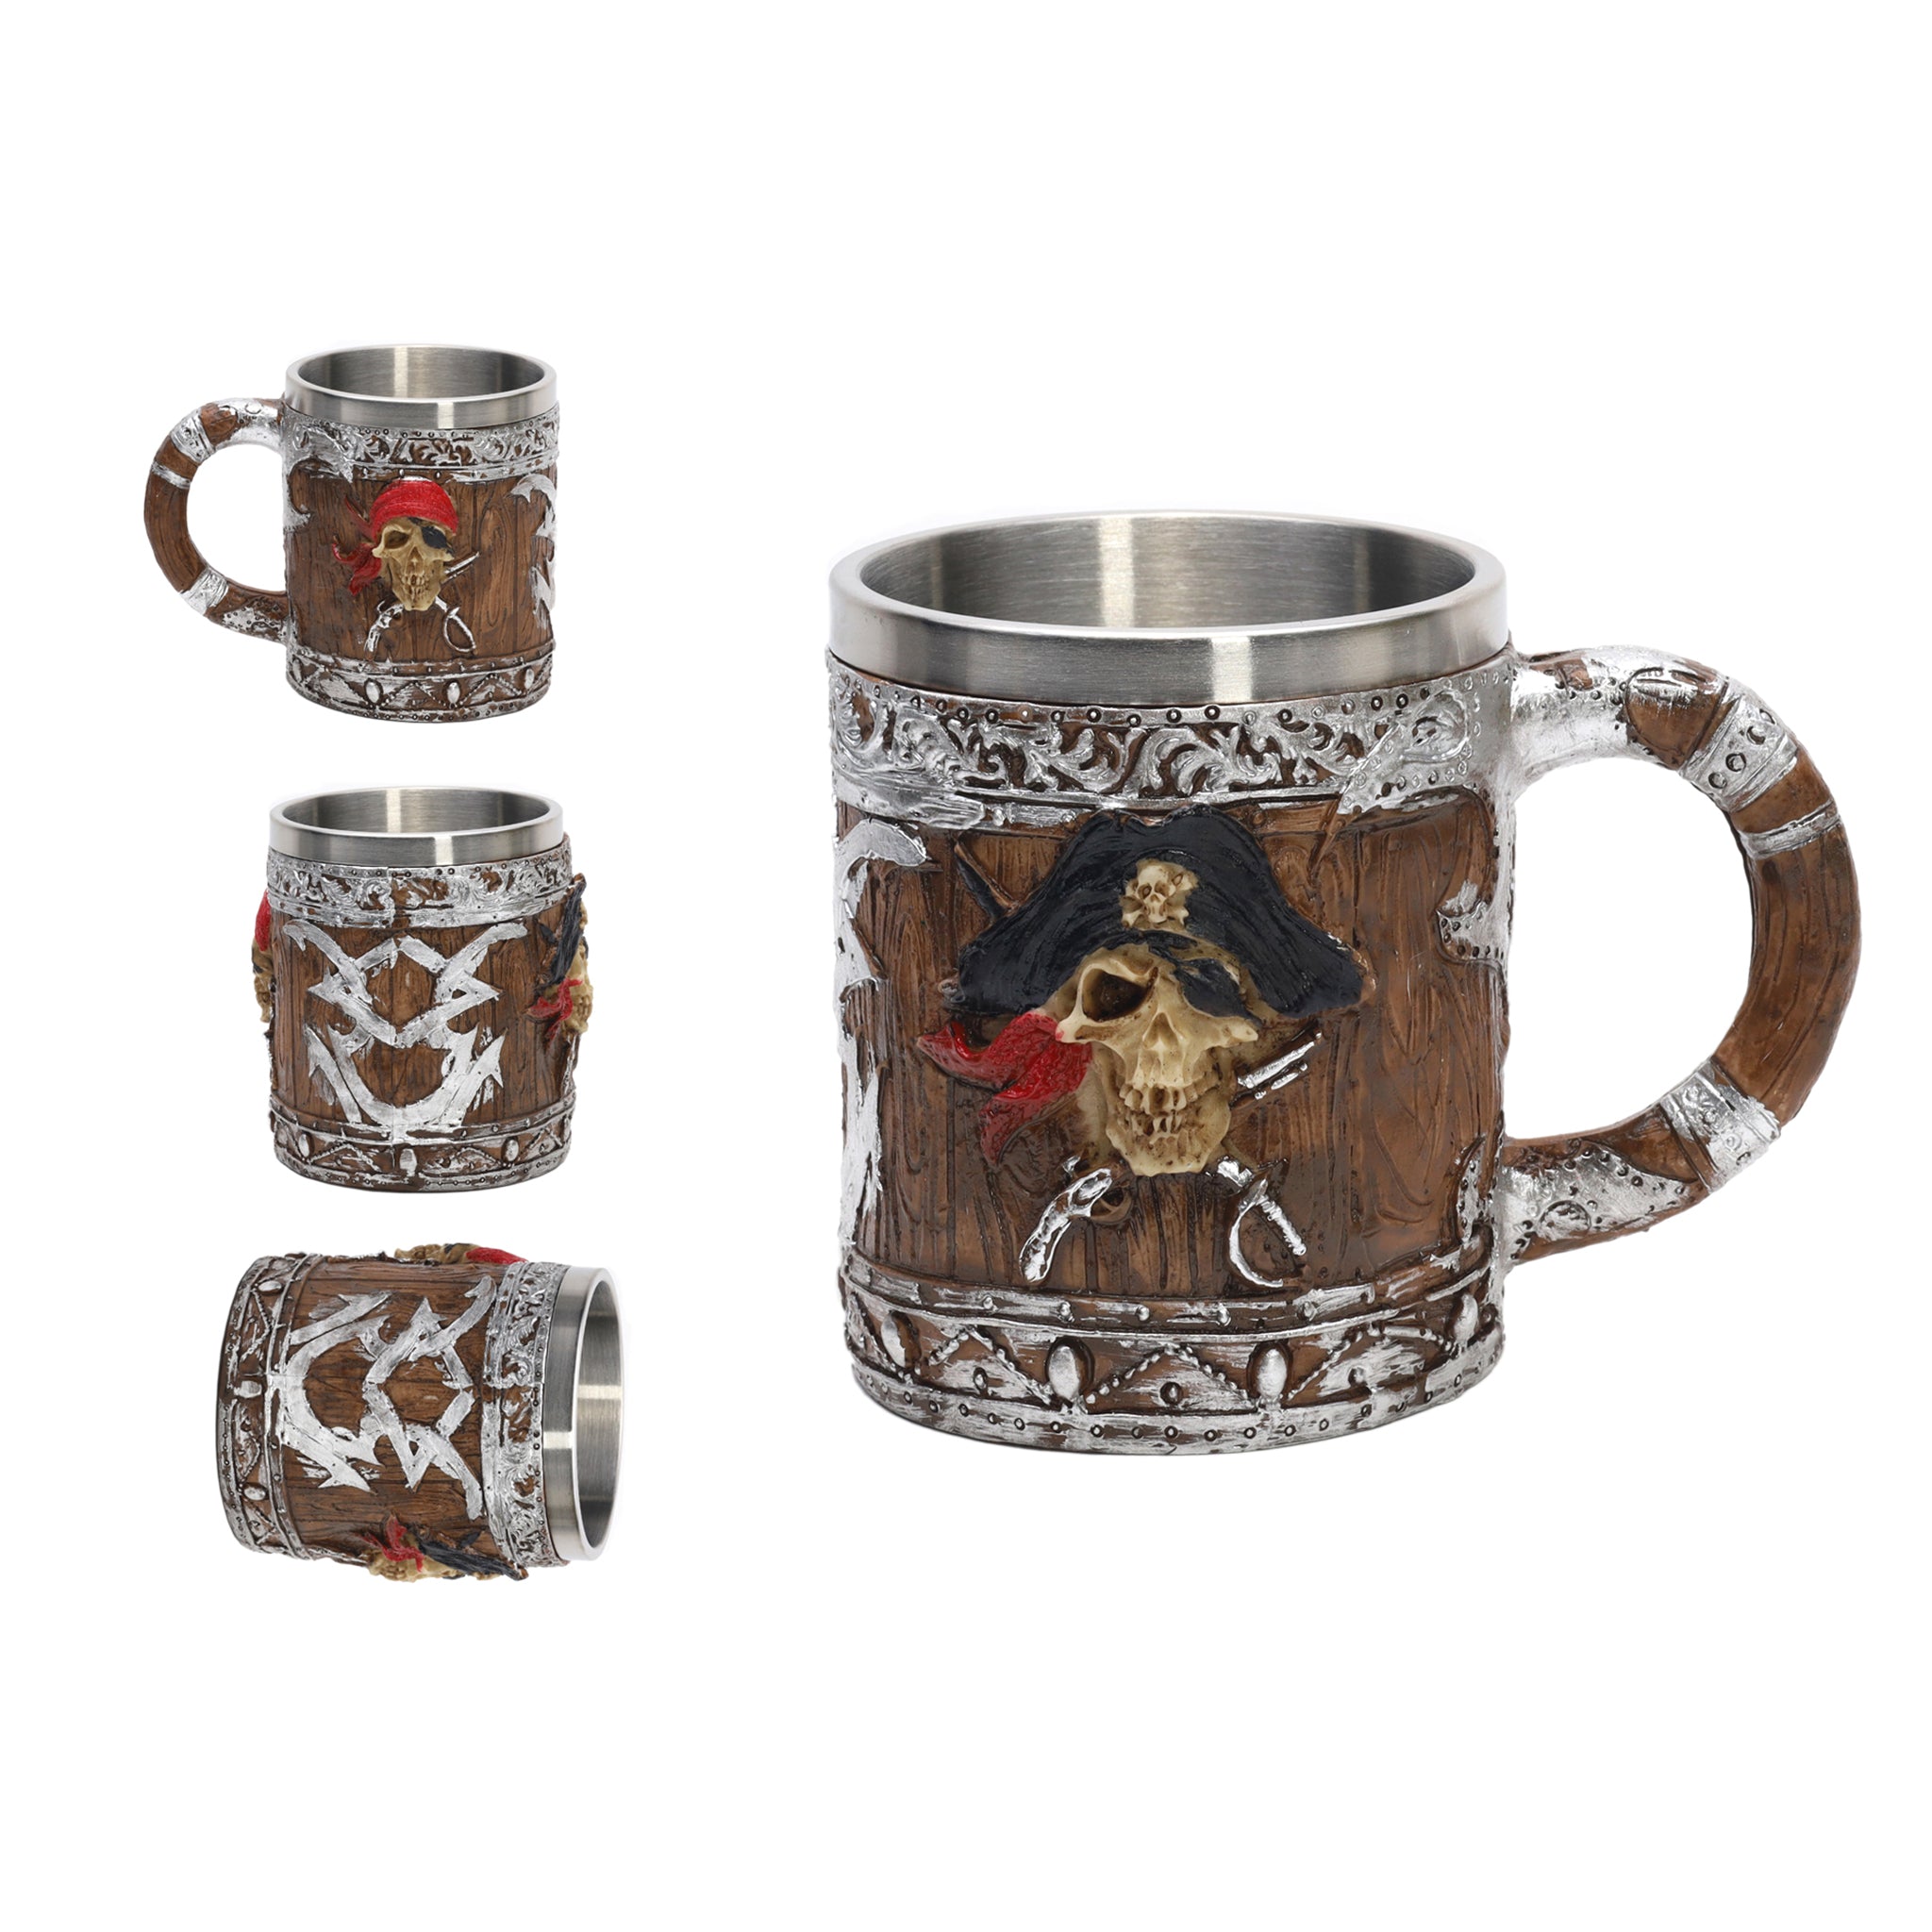 Pirates of the Caribbean Bandana Skull With Cross Swords Tankard Coffee Beer Mug Cup QuirkyStore.in